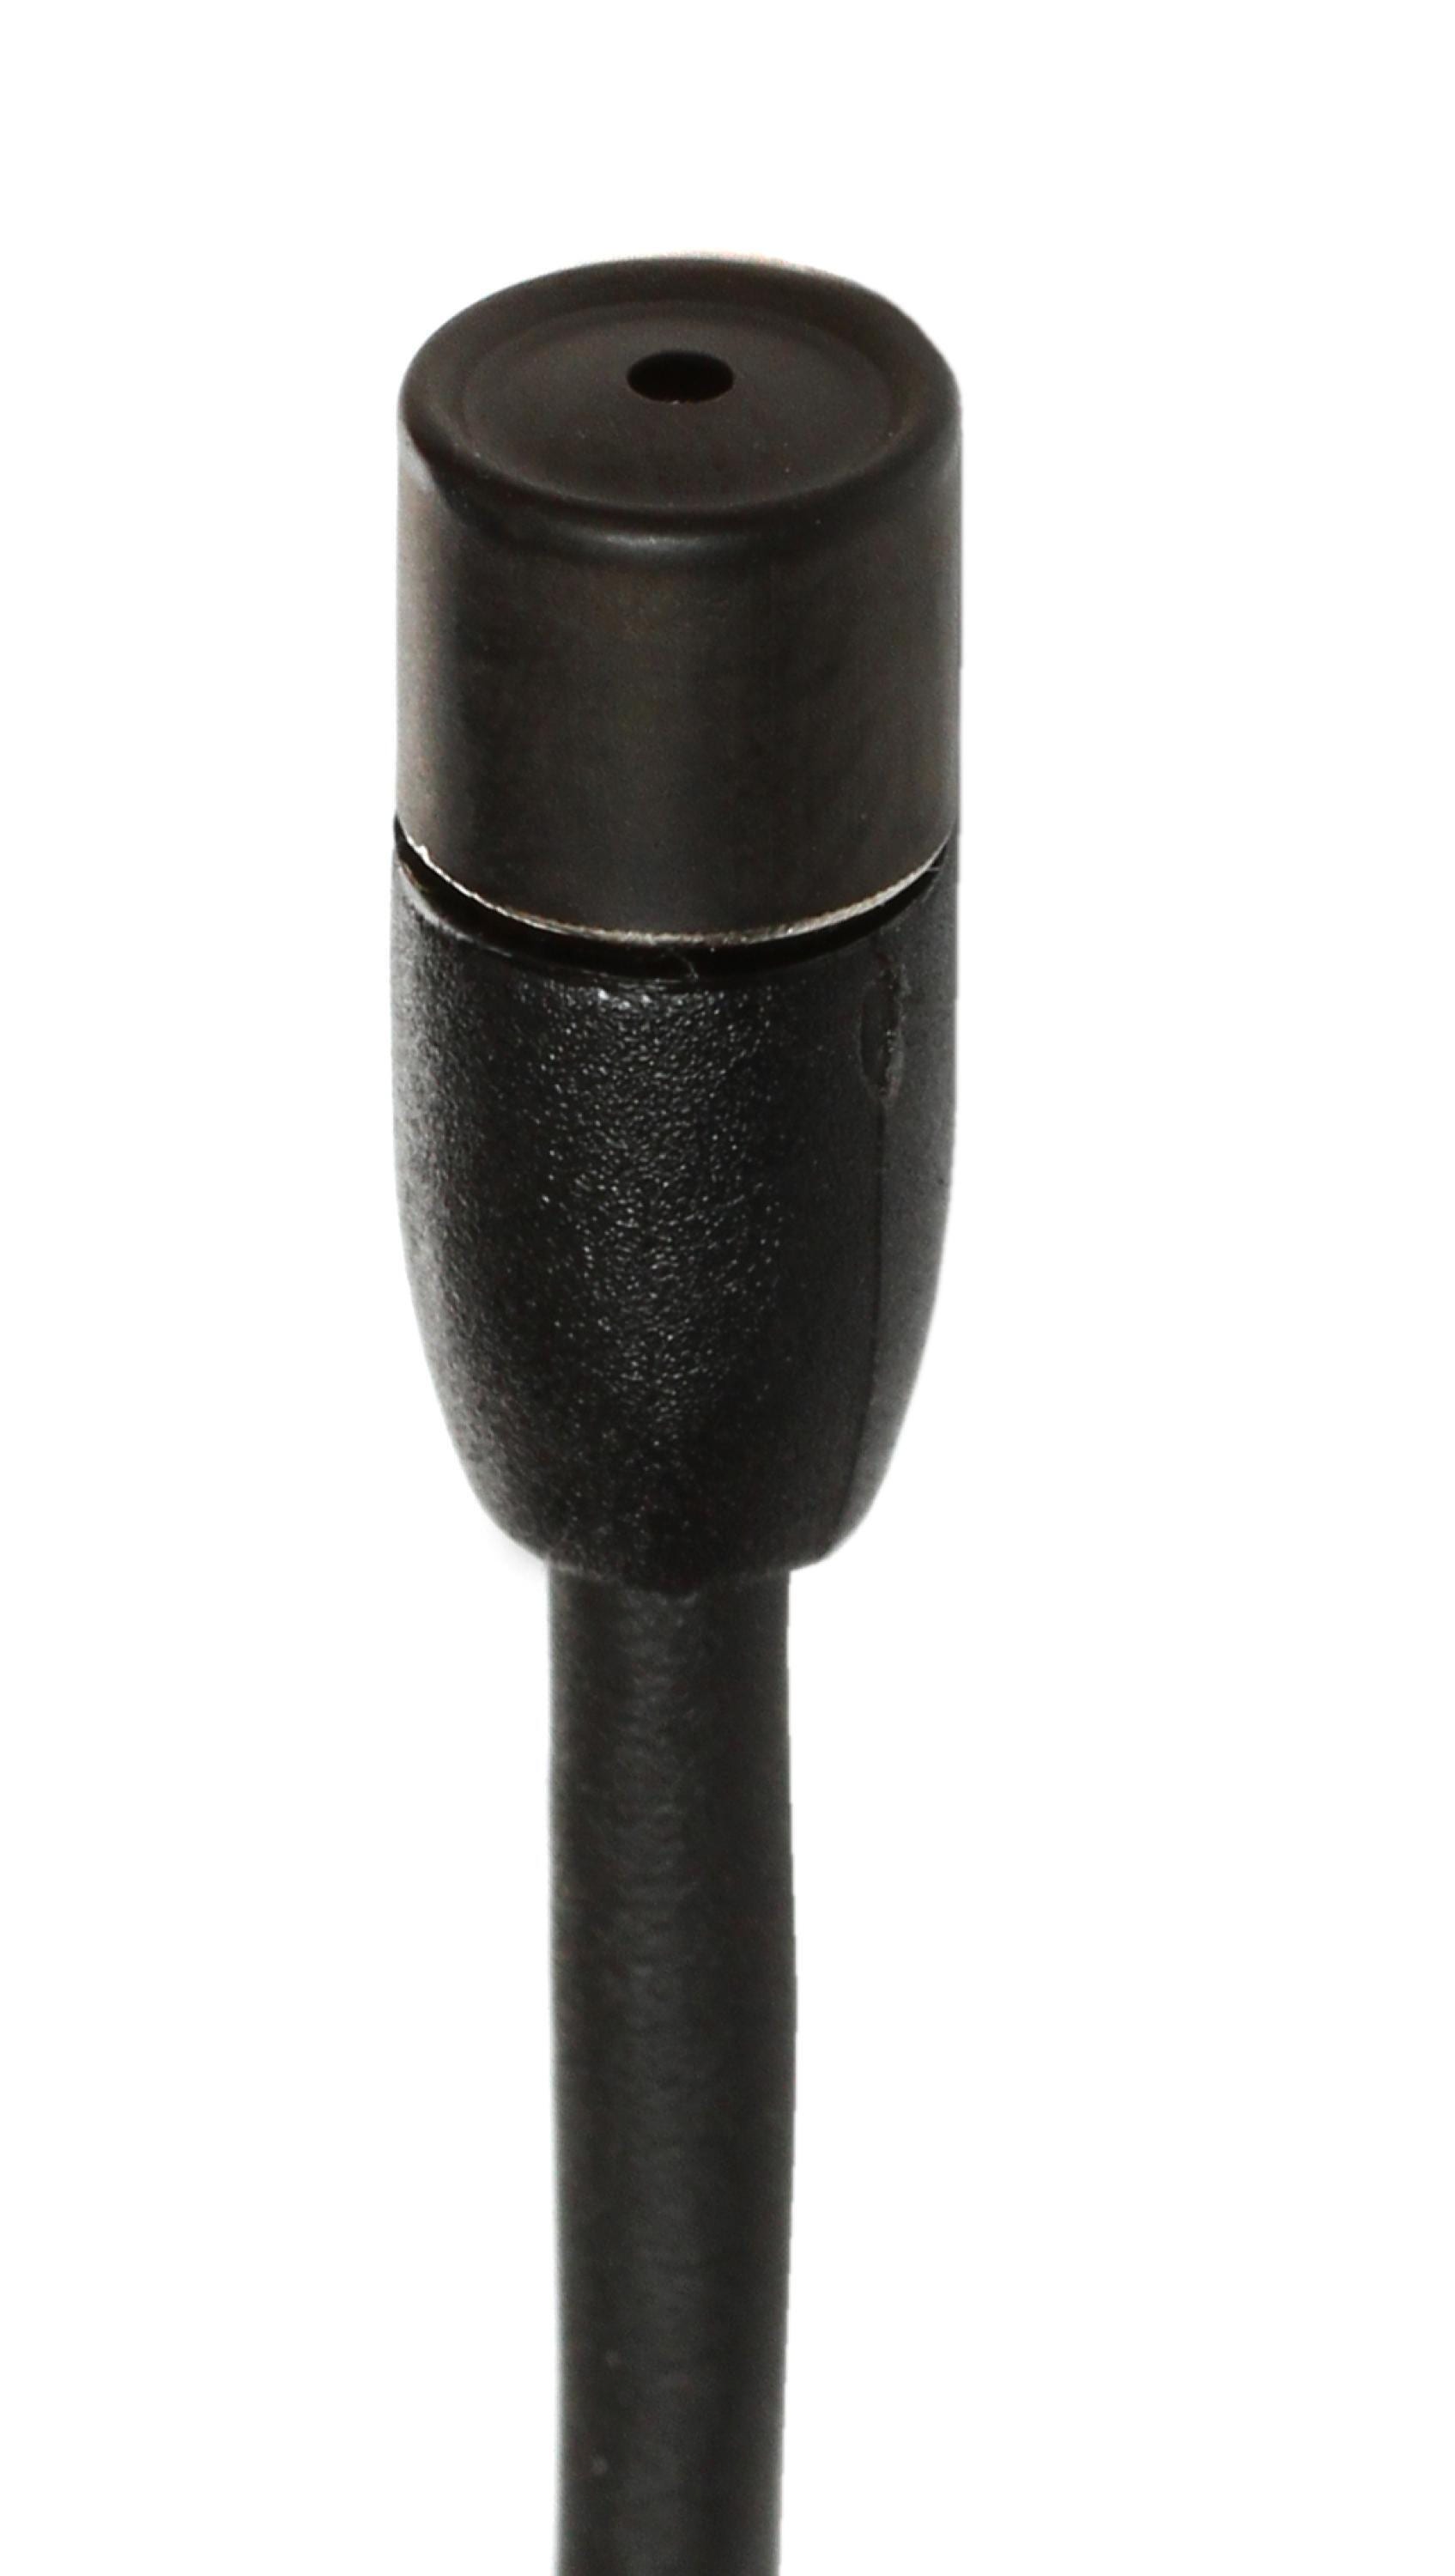 Buy Sennheiser MKE 2 Gold Series Subminiature Omnidirectional Lavalier  Microphone with XLR Connector (Black) online from Sharp Imaging